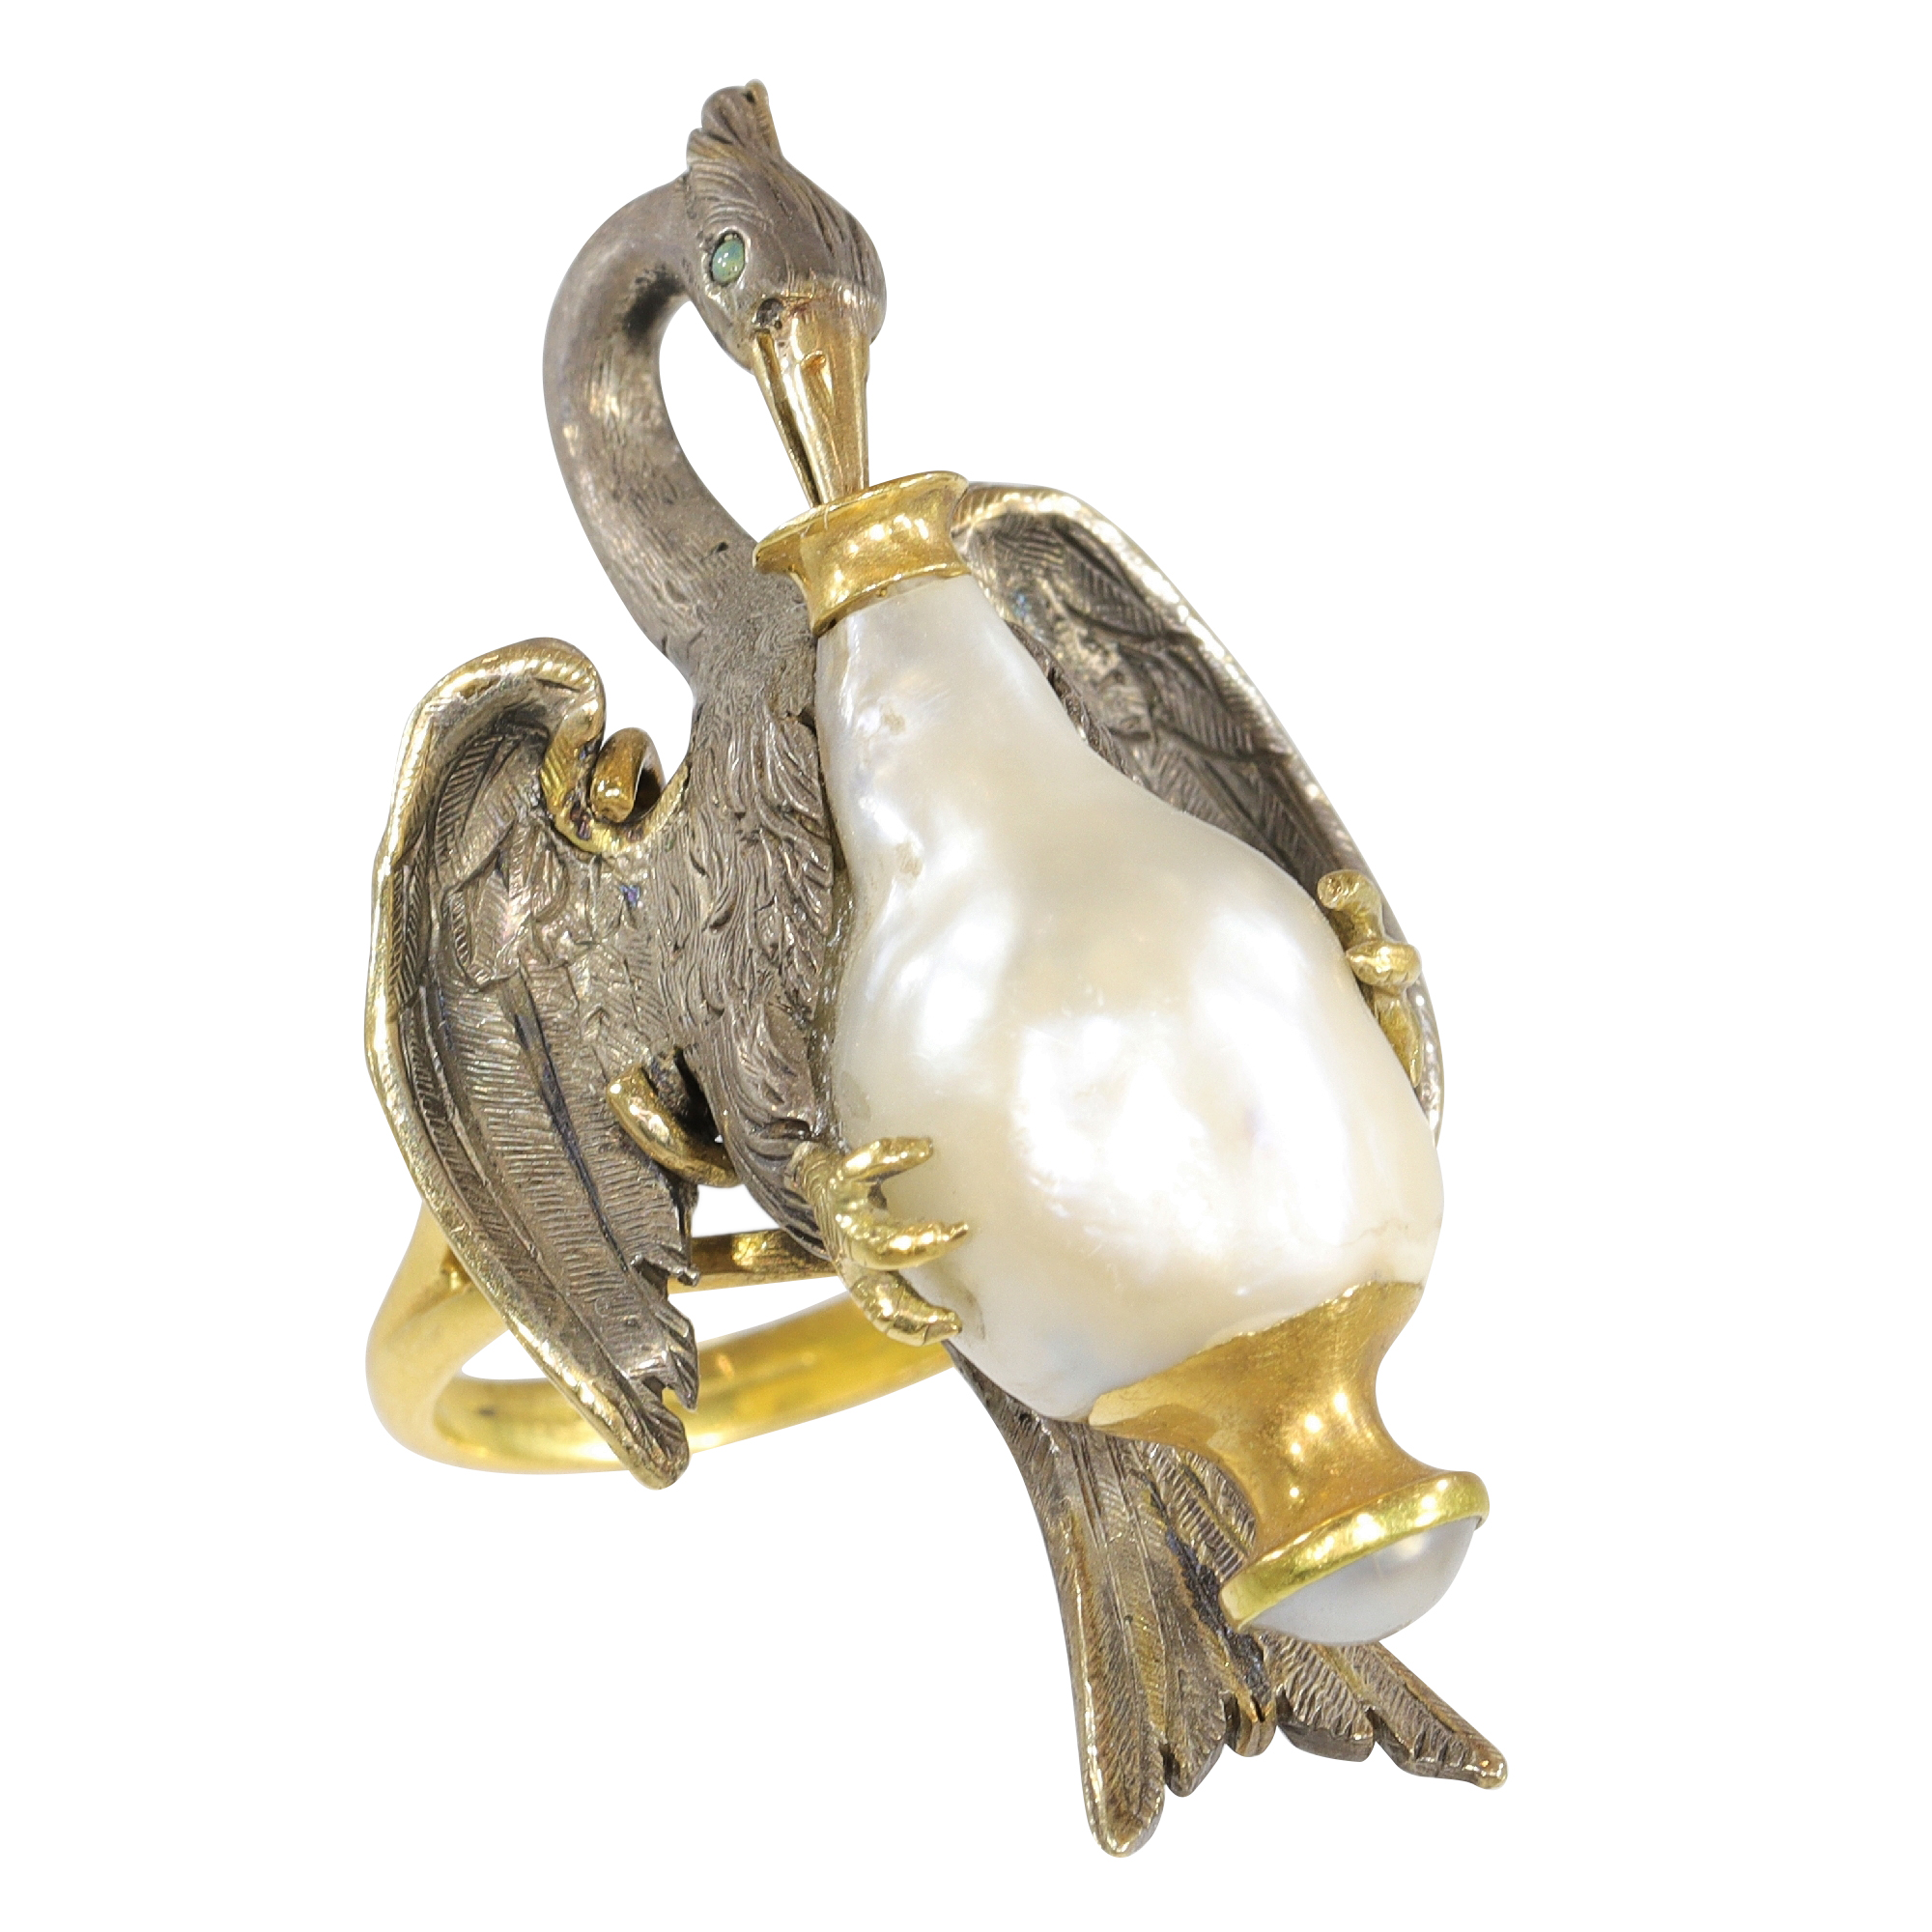 L'Art du Fable: 18K Gold Stork and Pearl Ring from Victorian France